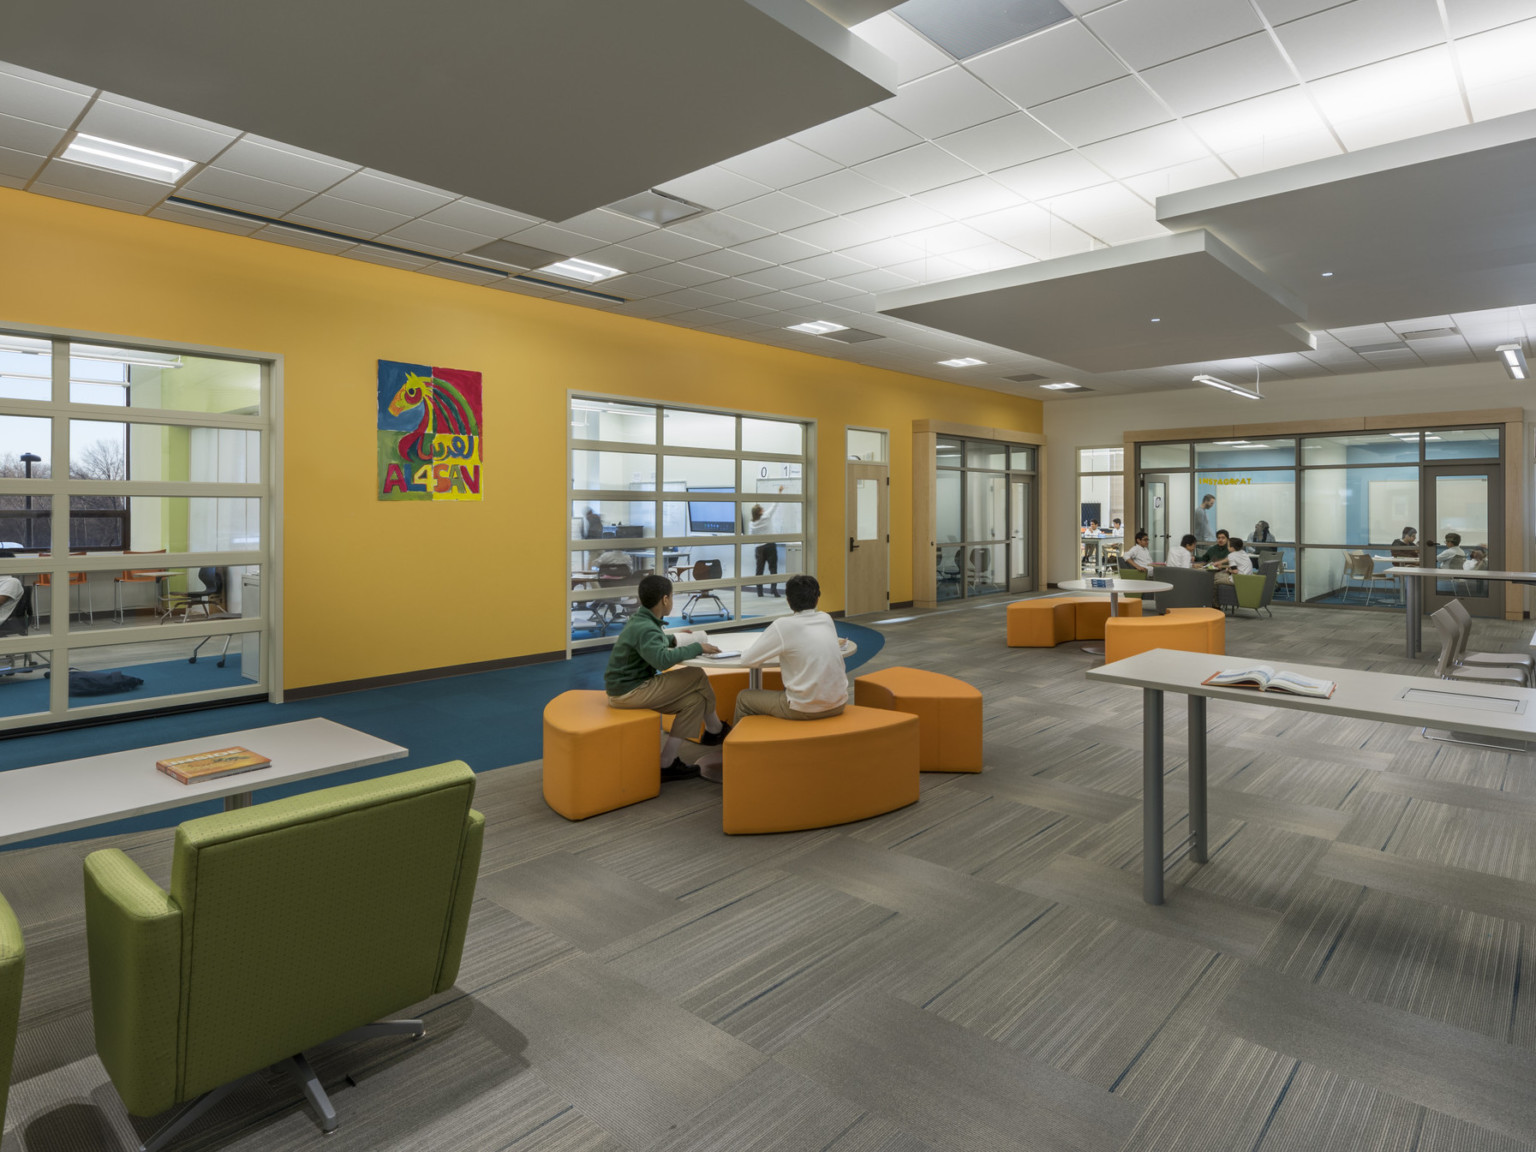 view of multiple classrooms with movable walls, writable surfaces, and flexible, colorful furniture